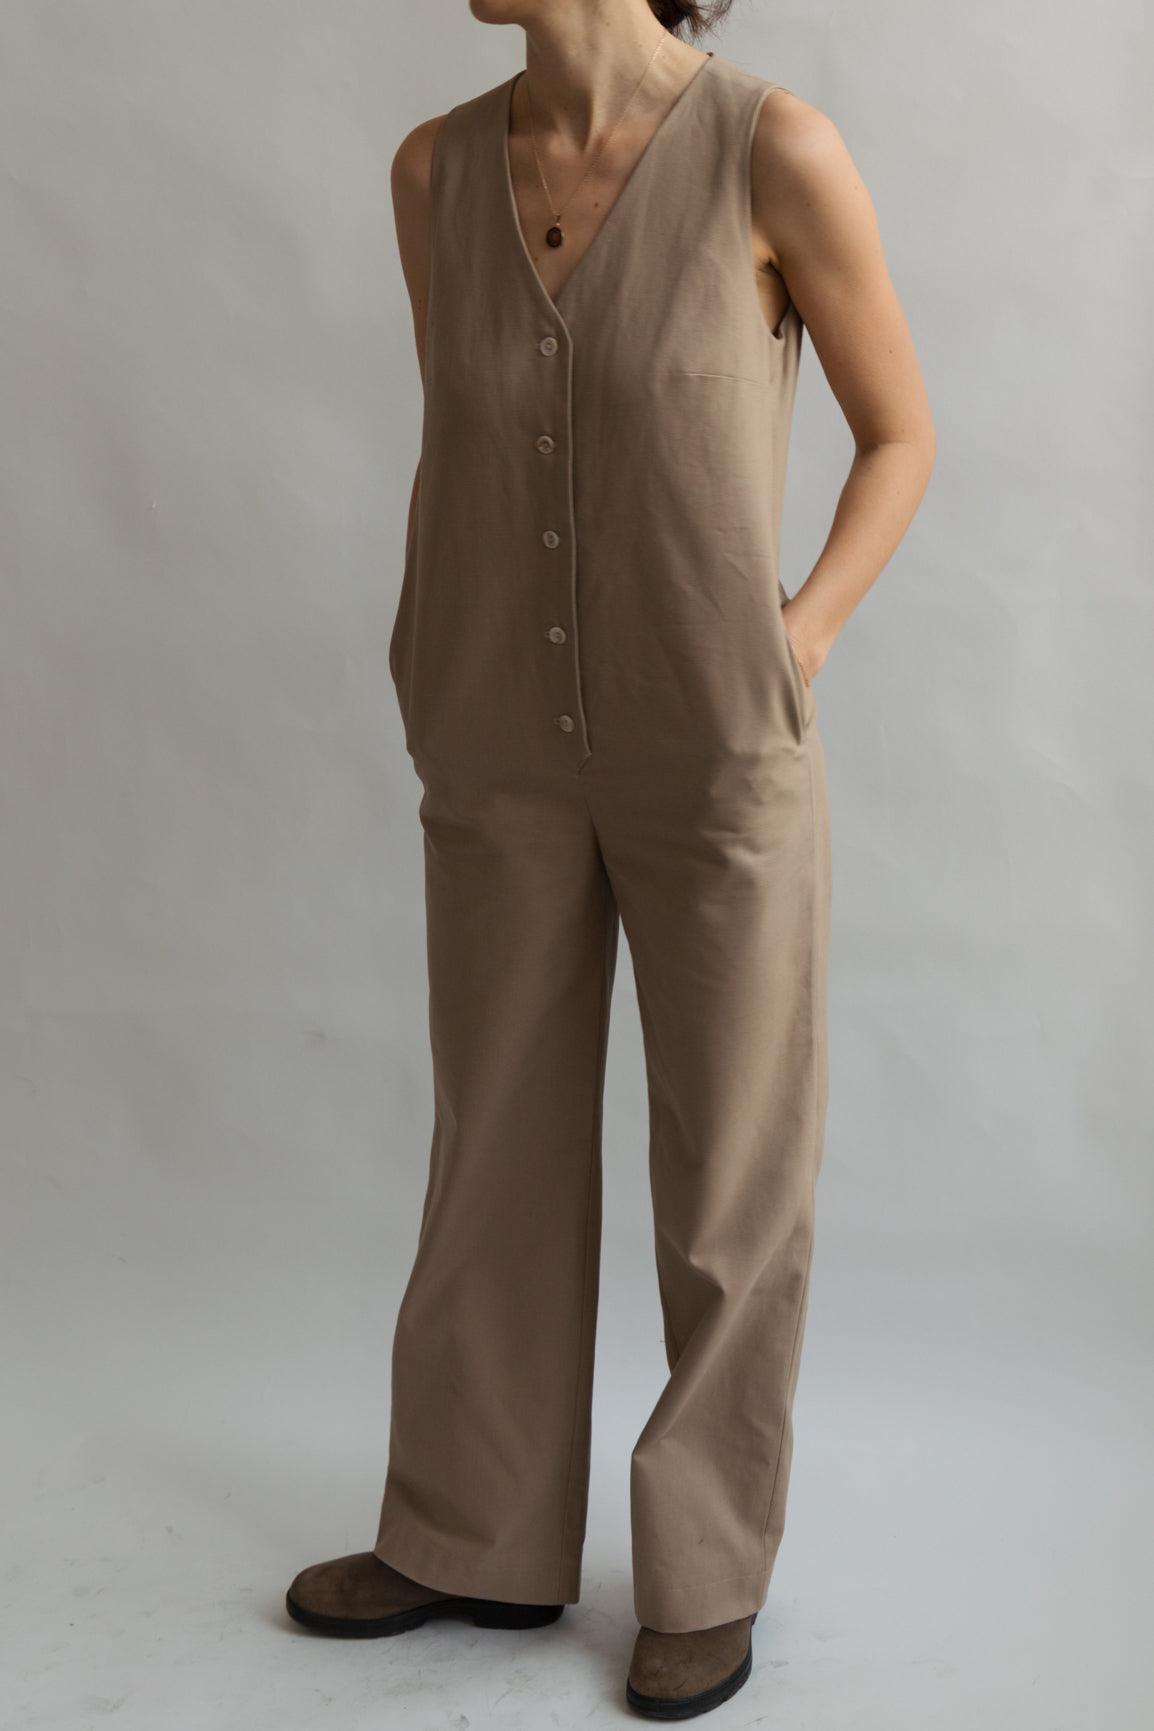 Beige color Jumpsuit overall workwear cotton canvas with pockets 5 buttons v-neck tall girls short girls oeko-tex 